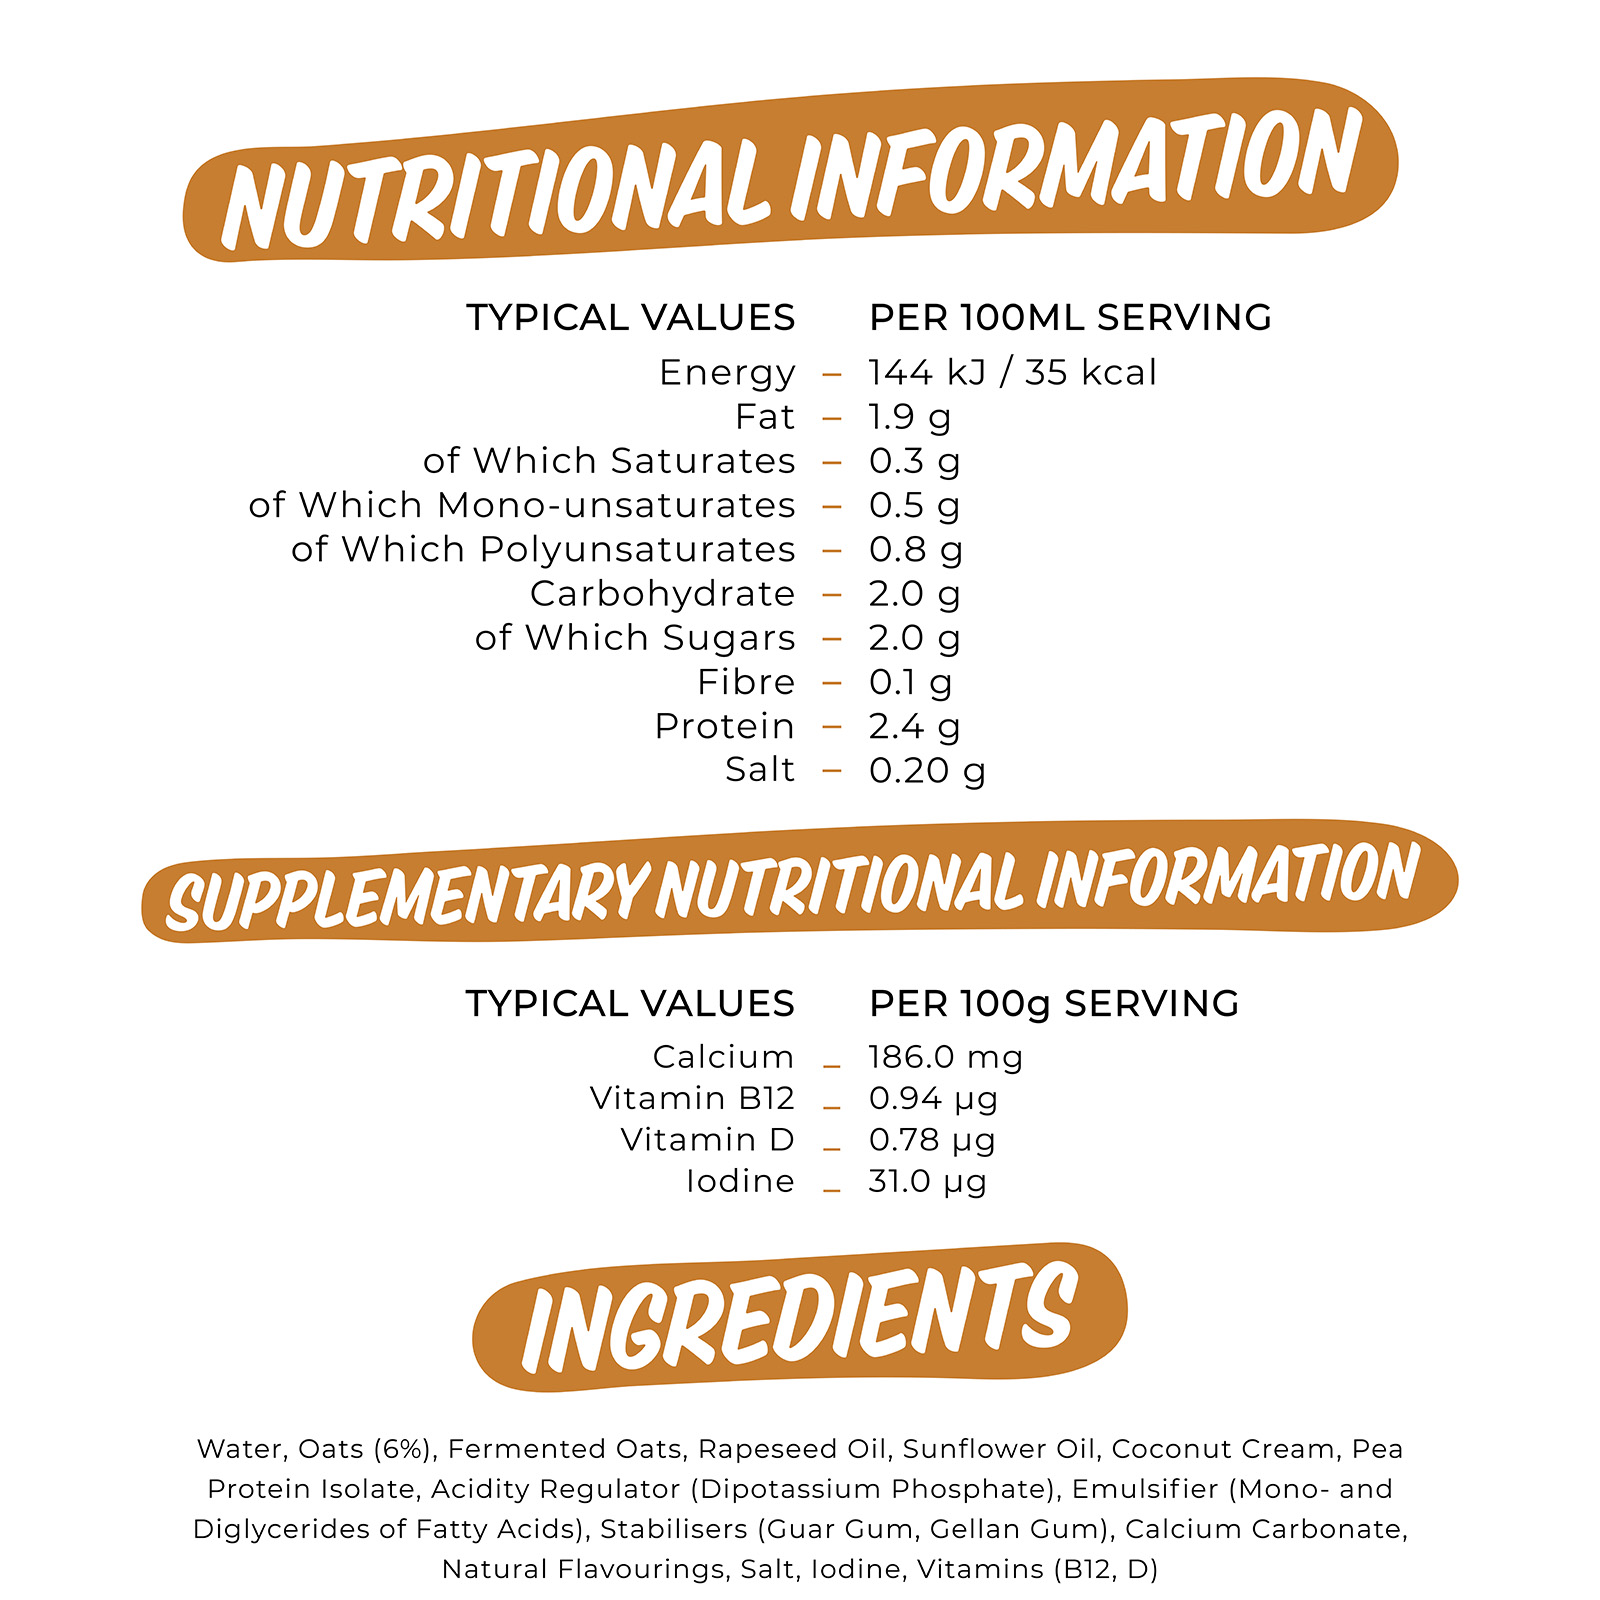 
                                  TYPICAL VALUES PER 100ML SERVING Energy 144 kJ /35 kcal Fat 1.9 g of Which Saturates 0.3 g of Which Mono-unsatu rates 0.5 g of Which Polyunsaturates 0.8 g Carbohydrate 2.0 g of Which Sugars 2.0 g Fibre 0.1 g Protein 2.4 g Salt 0.20 g 
                                  L'UPPLEMENTARY NUTRITIONAL INFORMATION 
                                  TYPICAL VALUES PER 100g SERVING Calcium _ 186.0 mg Vitamin B12 _ 0.94 pg Vitamin D _ 0.78 pg Iodine _ 31.0 pg 

                                  Water, Oats (6%), Fermented Oats, Rapeseed Oil, Sunflower Oil, Coconut Cream, Pea Protein Isolate, Acidity Regulator (Dipotassium Phosphate), Emulsifier (Mono- and Diglycerides of Fatty Acids), Stabilisers (Guar Gum, Gellan Gum), Calcium Carbonate, Natural Flavourings, Salt, Iodine, Vitamins (B12, D) 
                                  